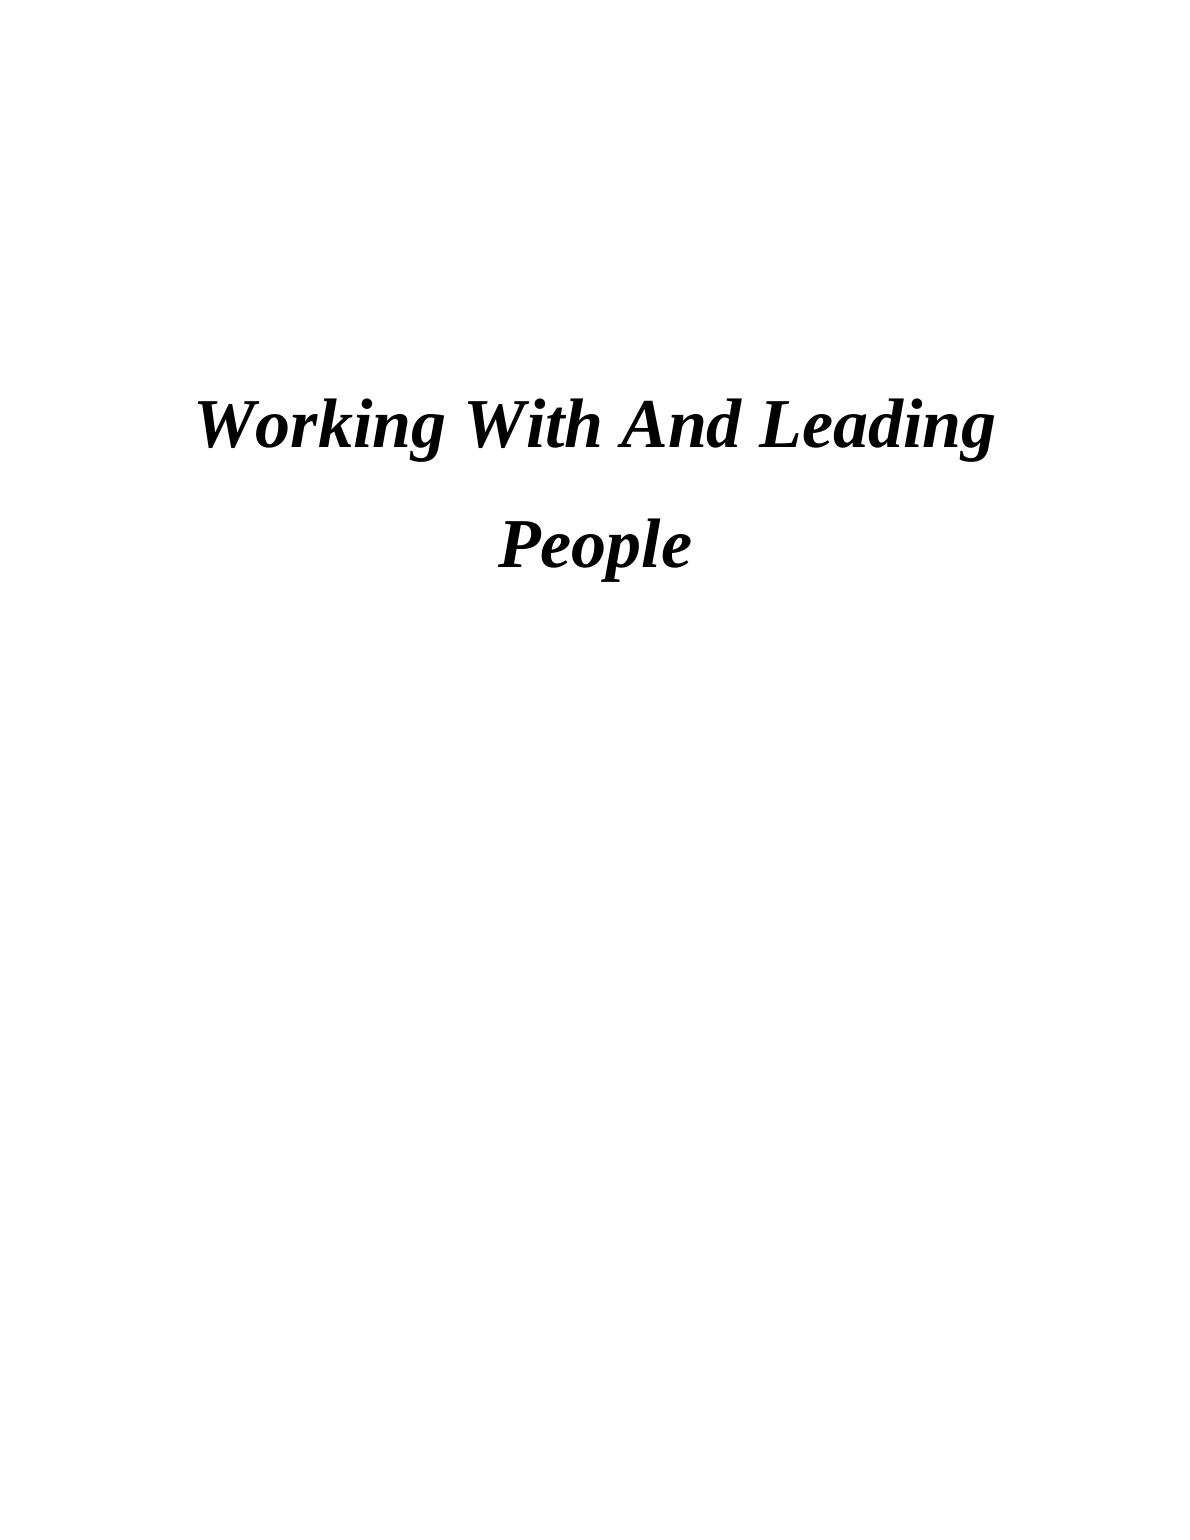 Working With And Leading People : Report on United Parcel Services_1